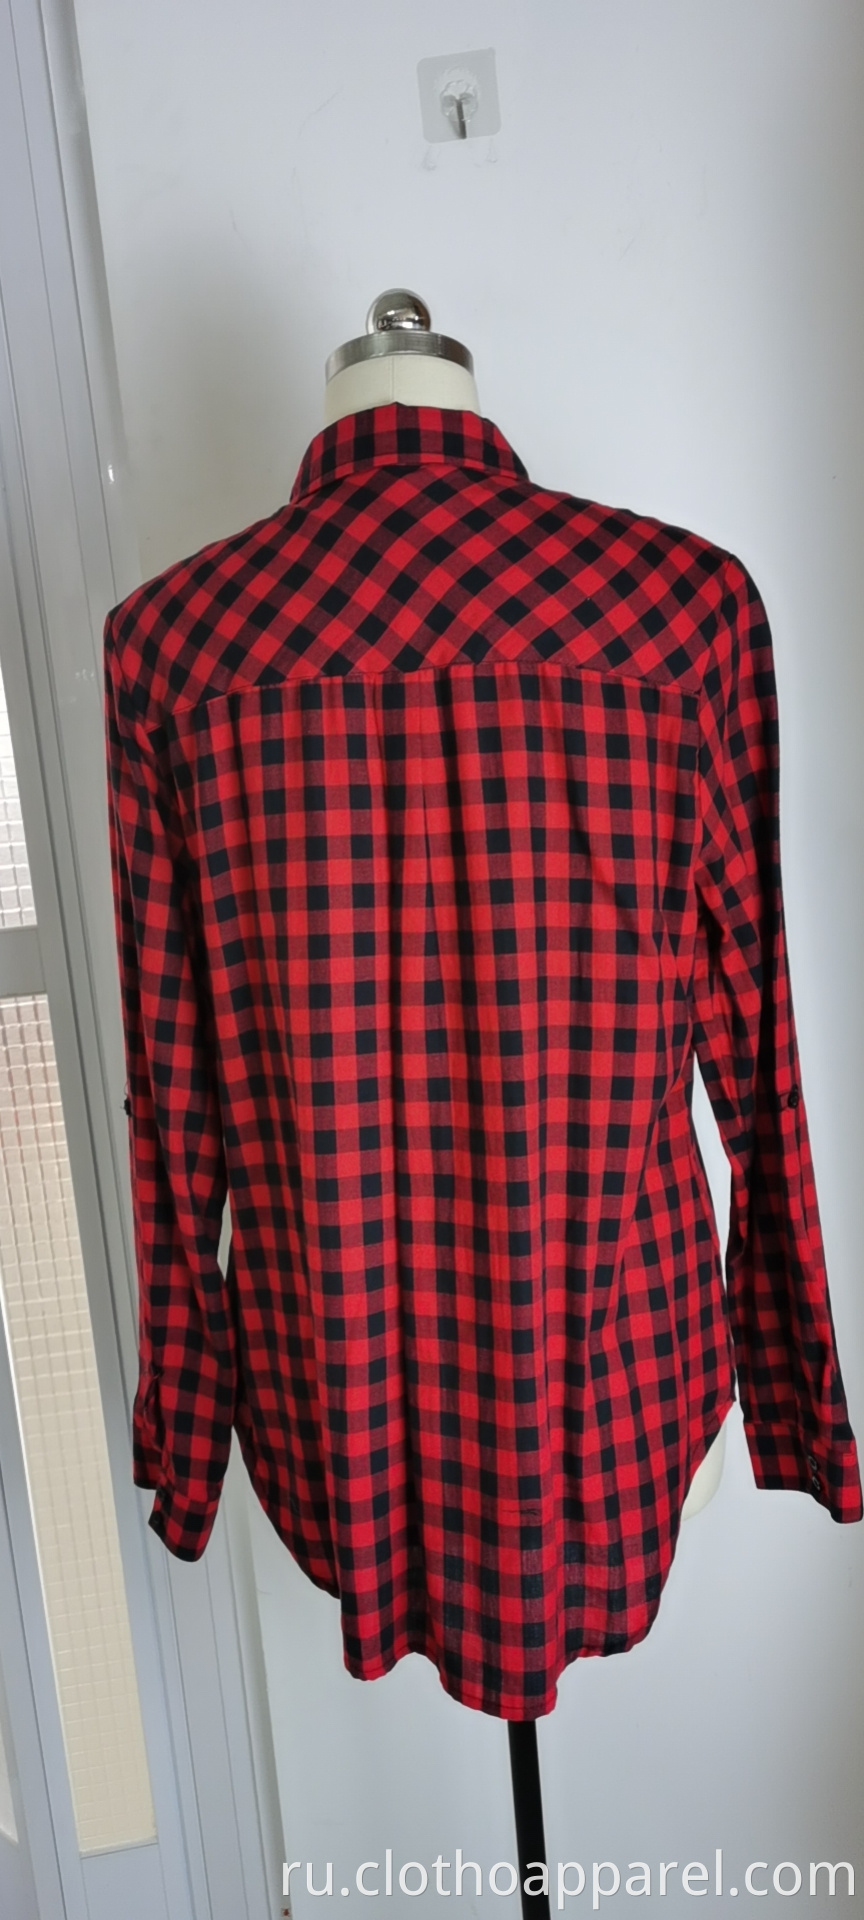 Wholesale Ladies Red And Black Checked Shirts